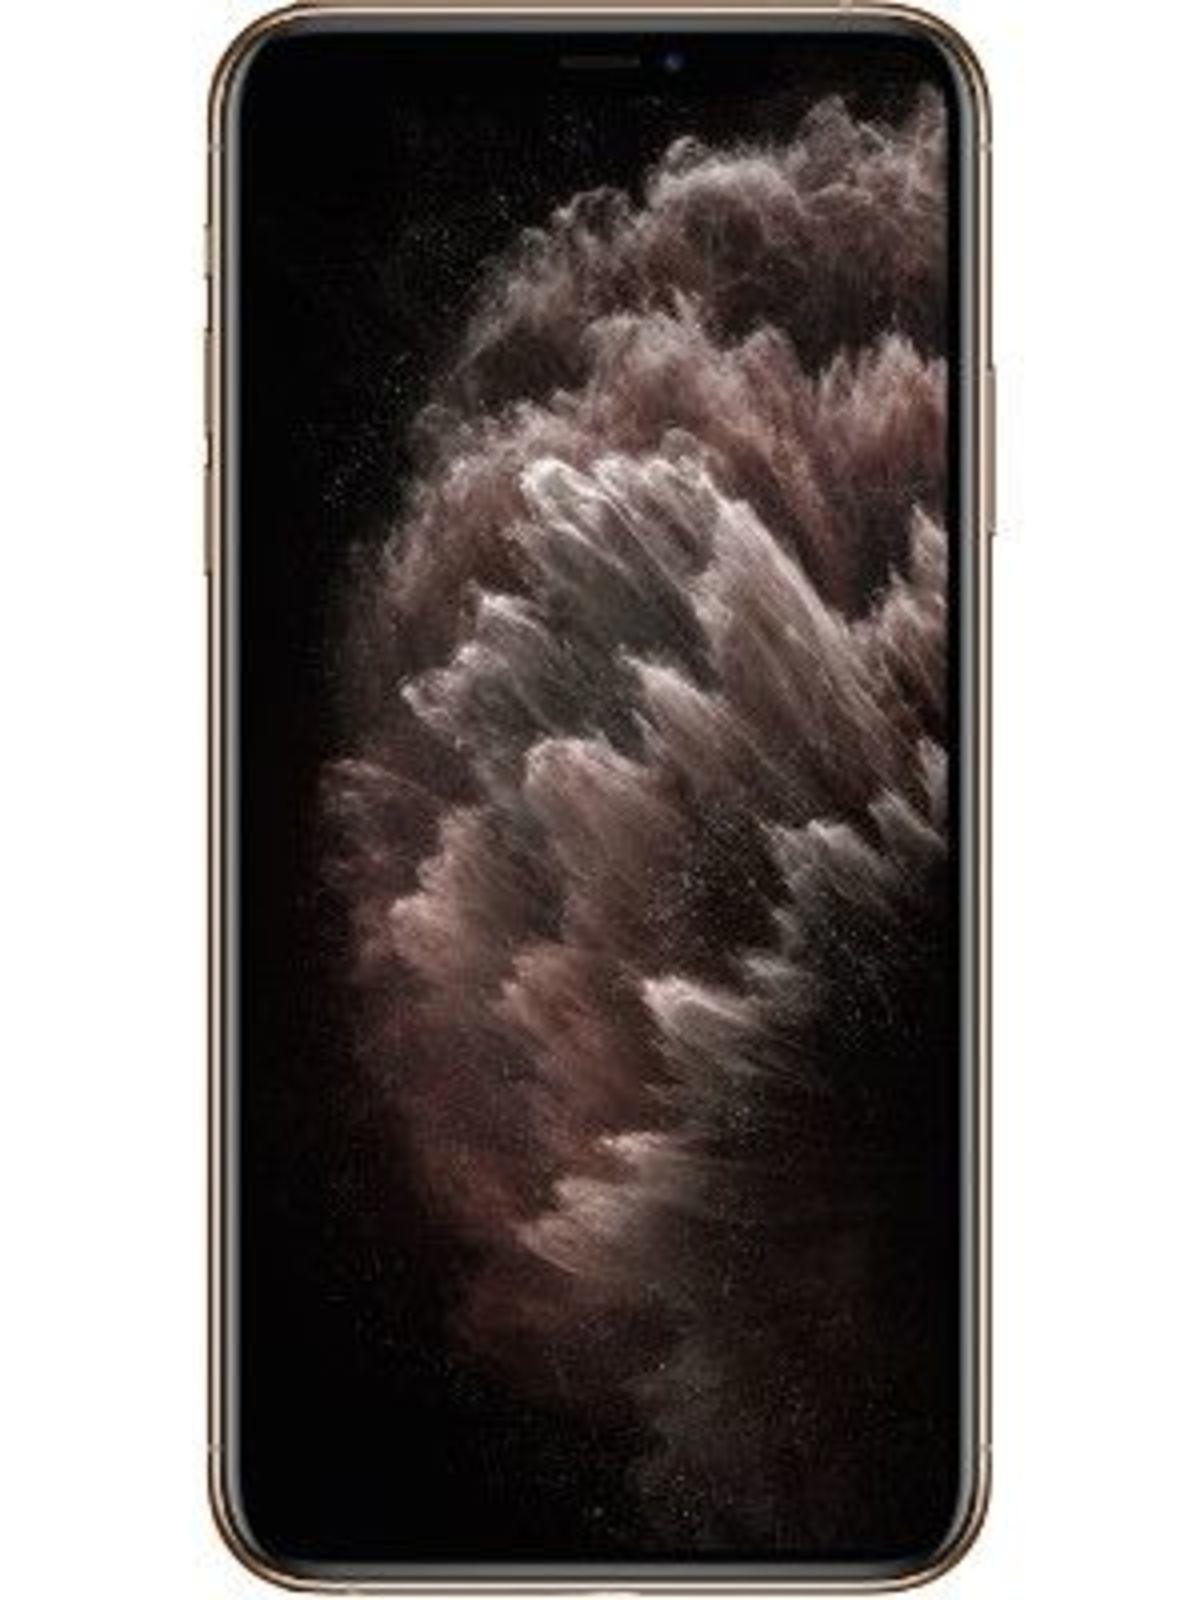 Apple Iphone 11 Pro Max Price In India Full Specifications 21st Jul 22 At Gadgets Now